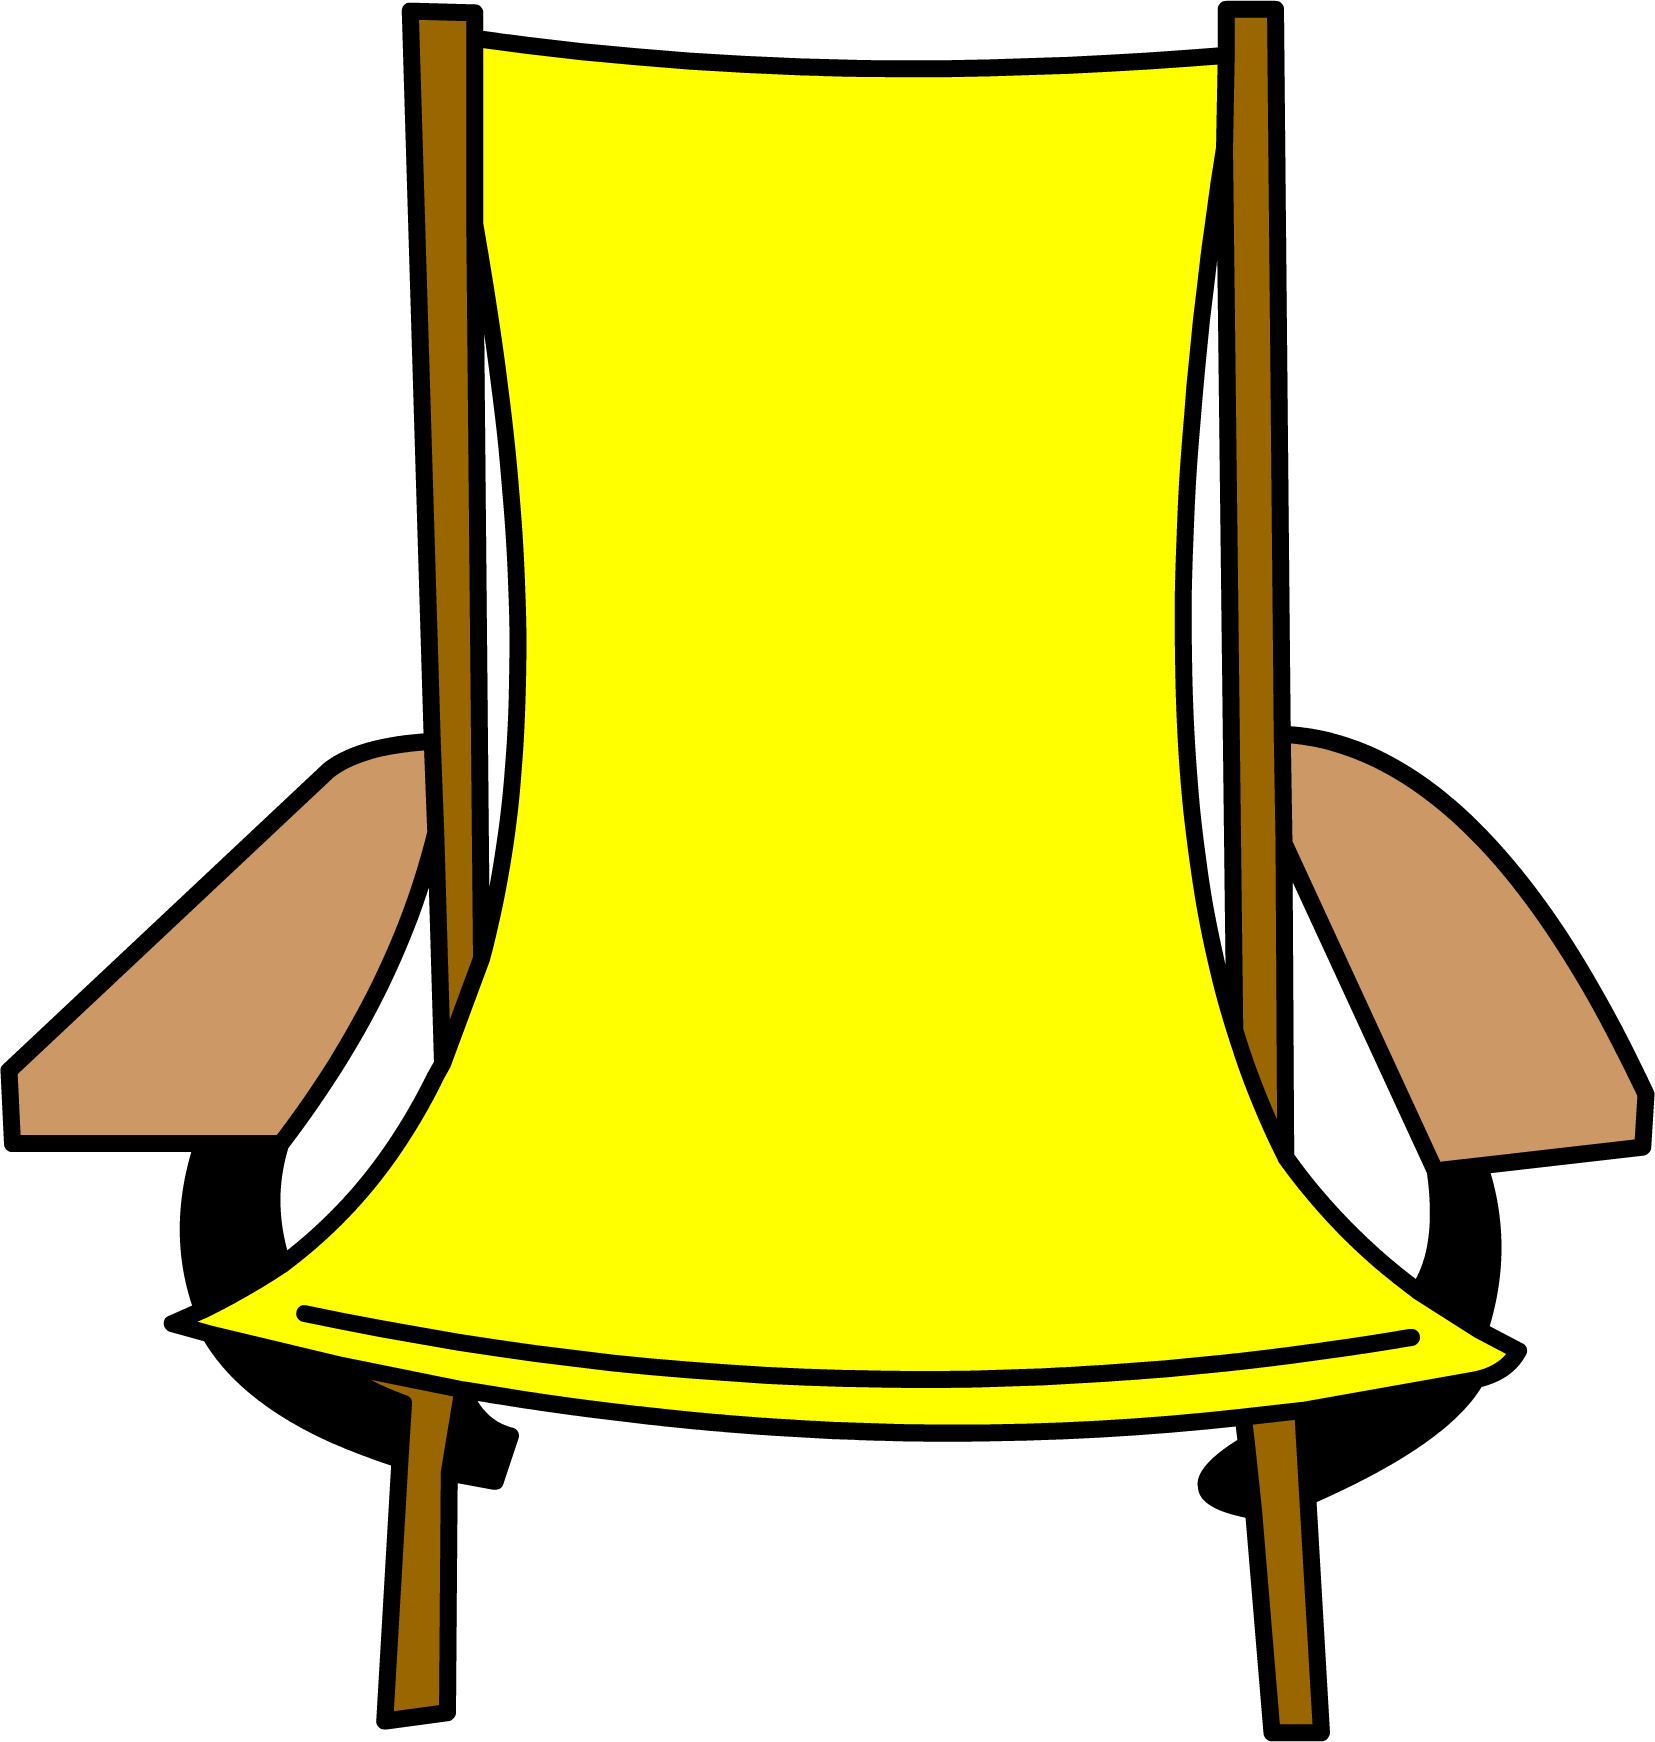 Folding Chair - Club Penguin Outdoor Furniture (1655x1742)